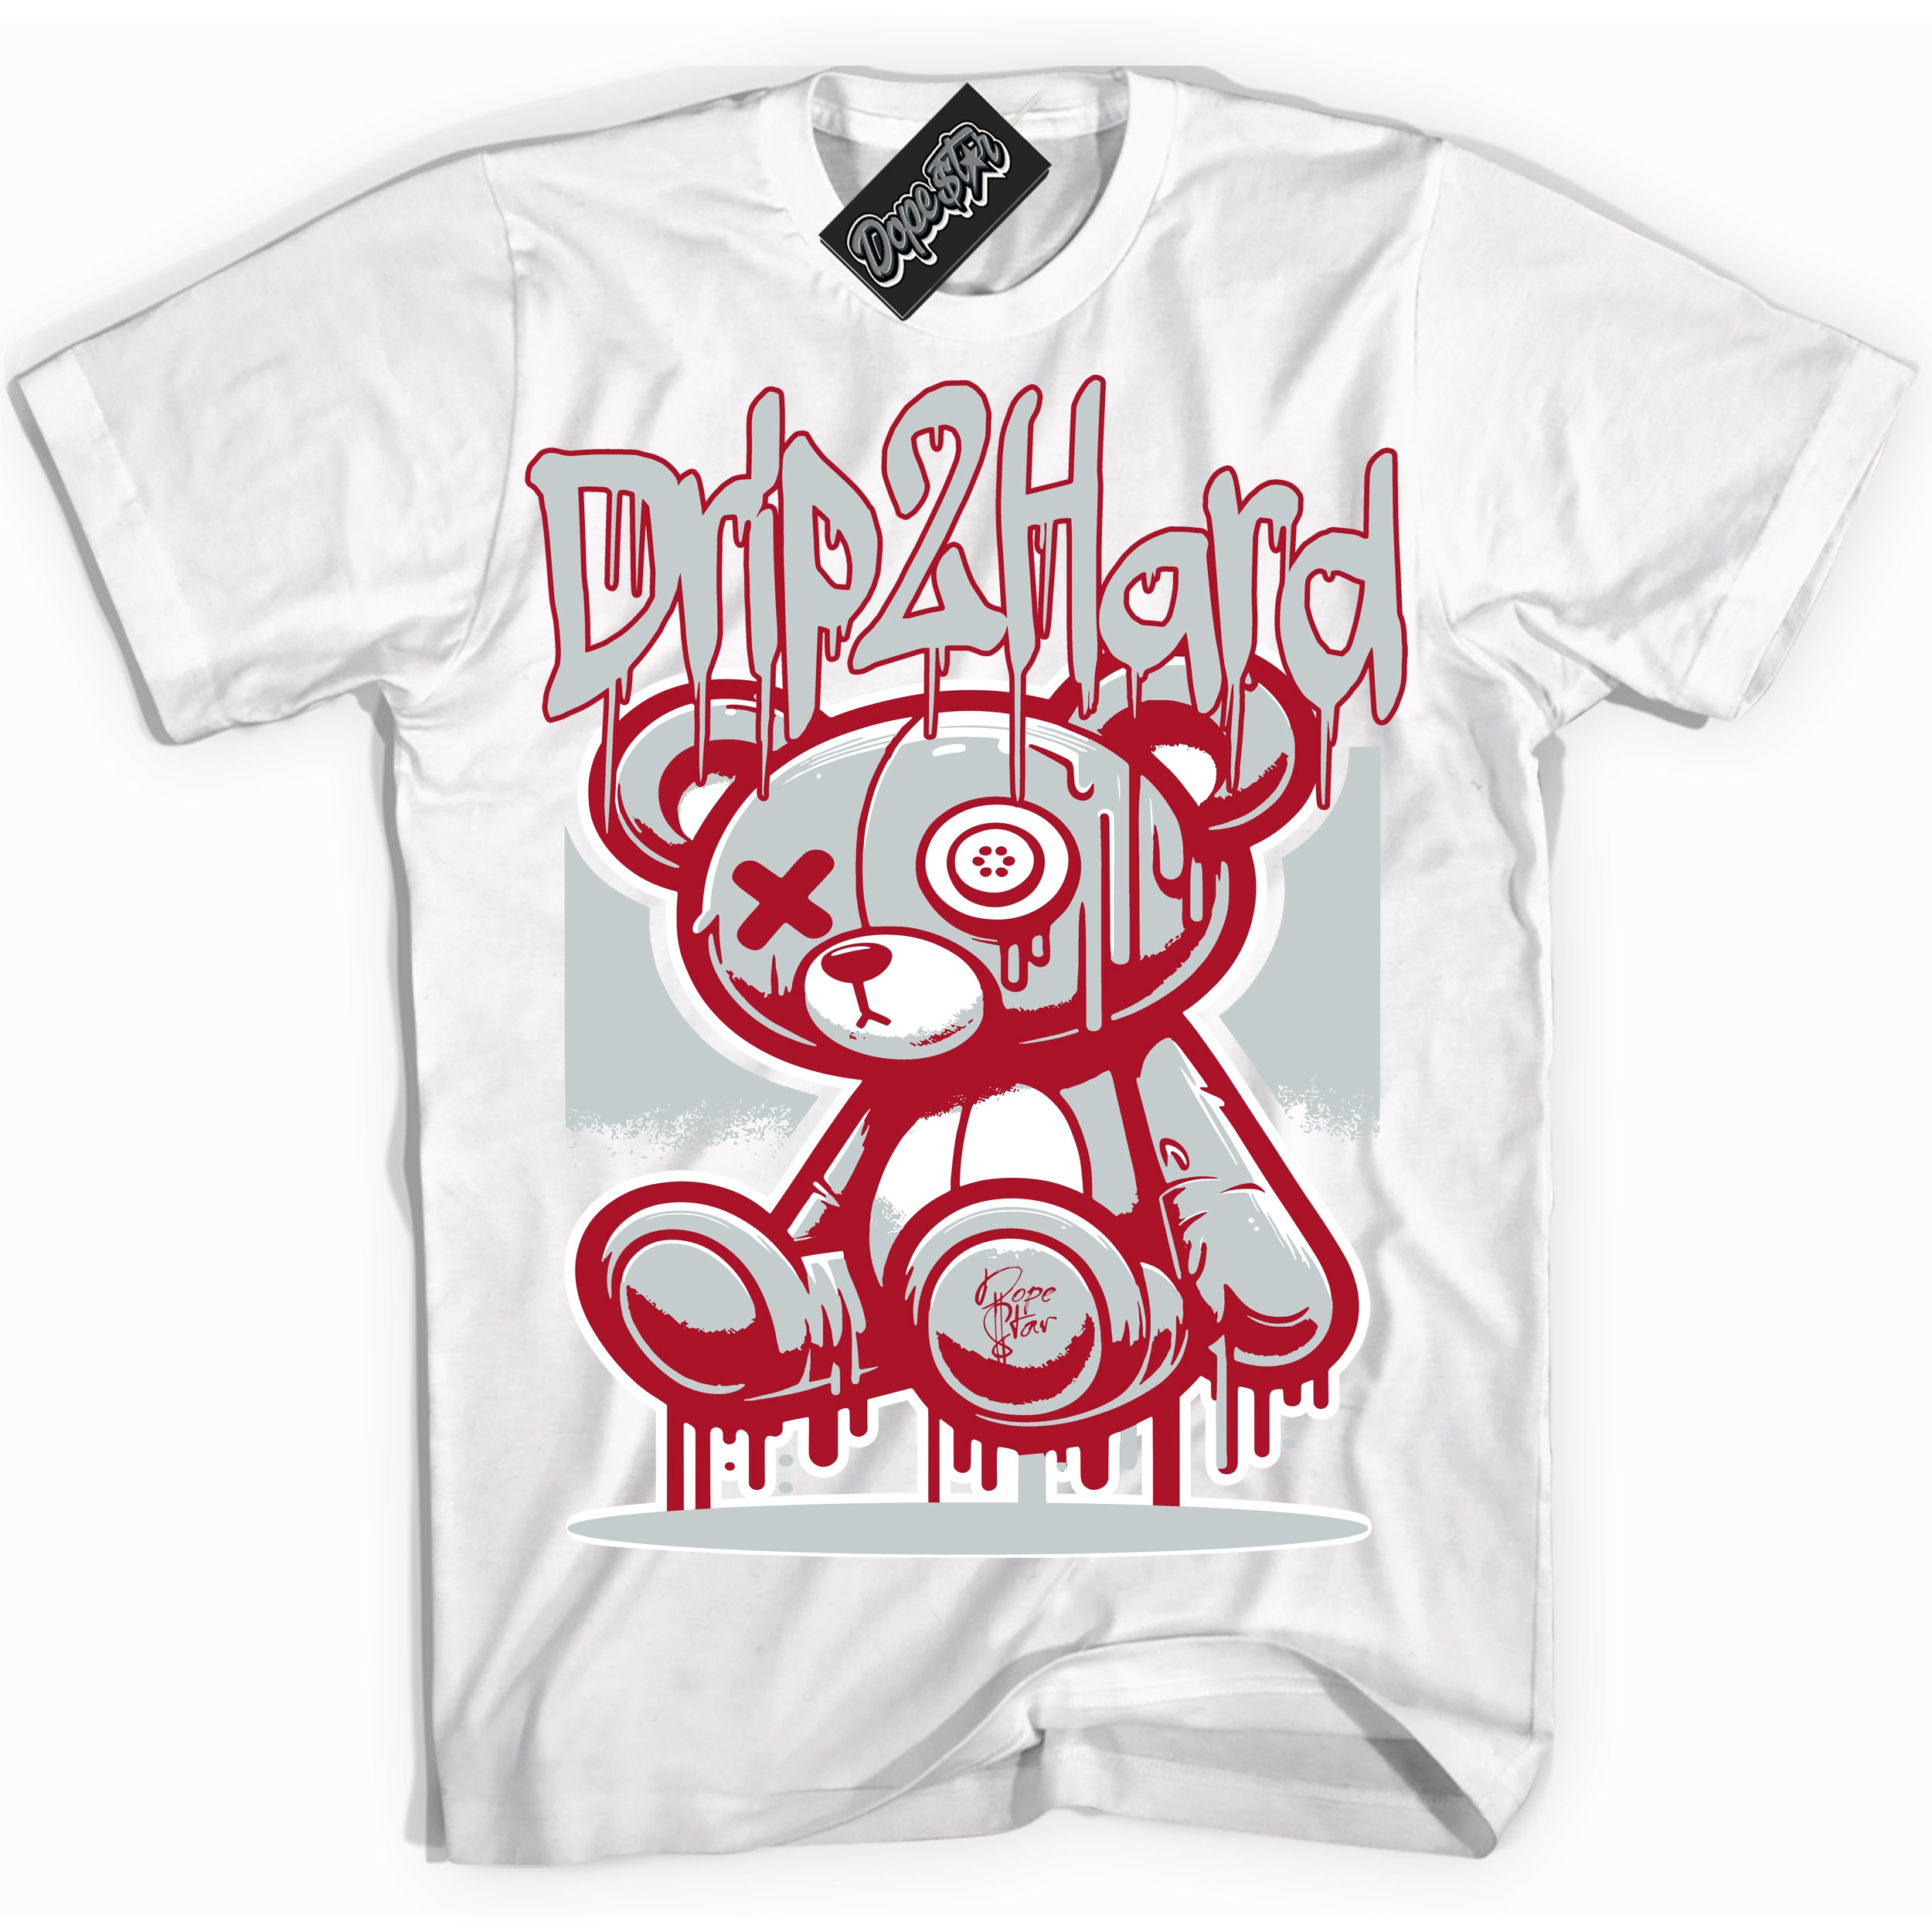 Cool White Shirt with “ Drip 2 Hard” design that perfectly matches Reverse Ultraman Sneakers.